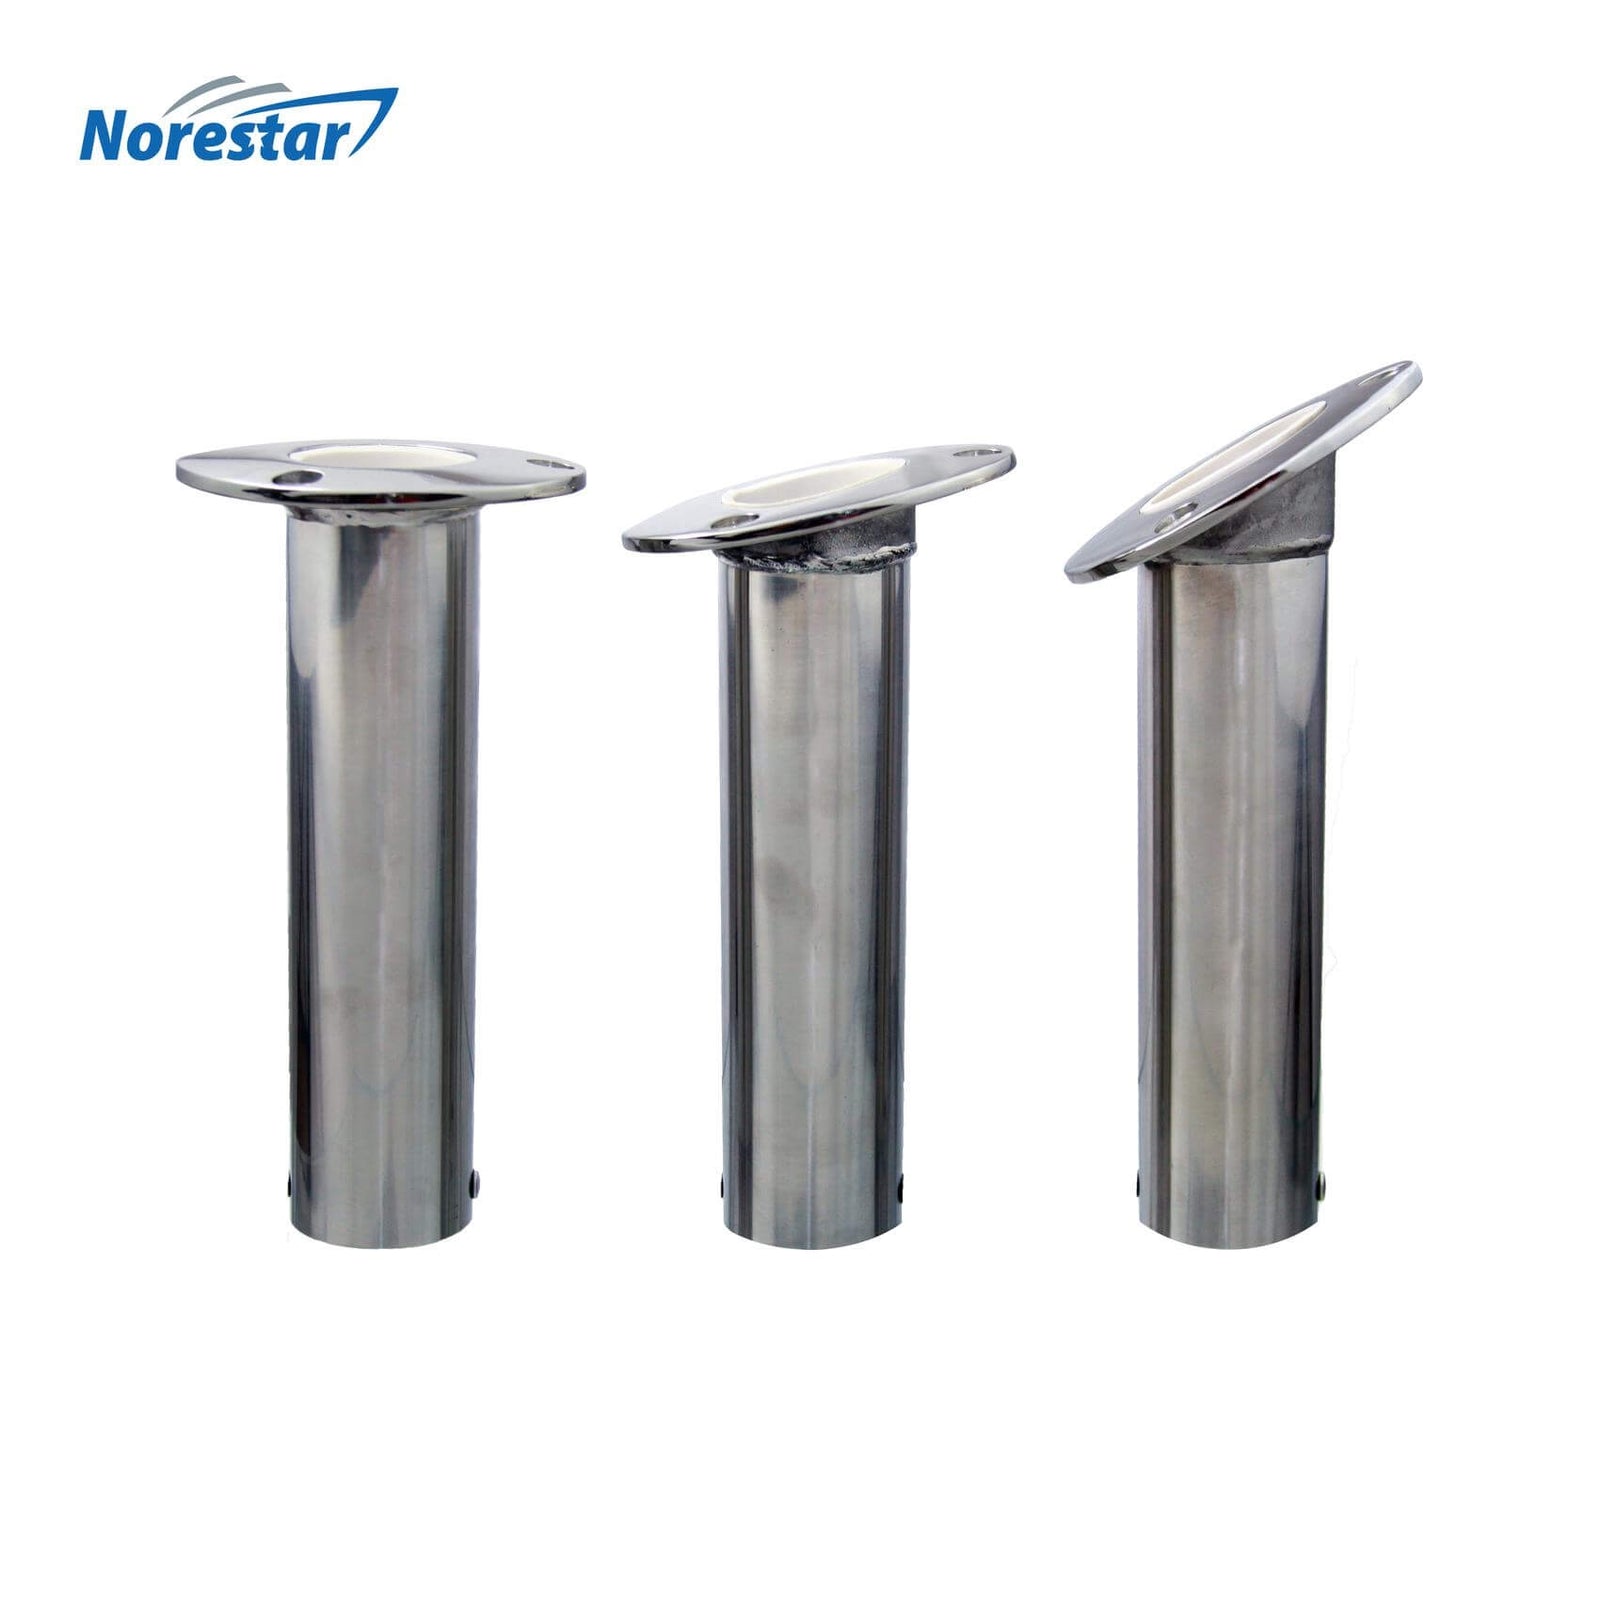 Stainless Rod Holder - 30 degree angled with cap